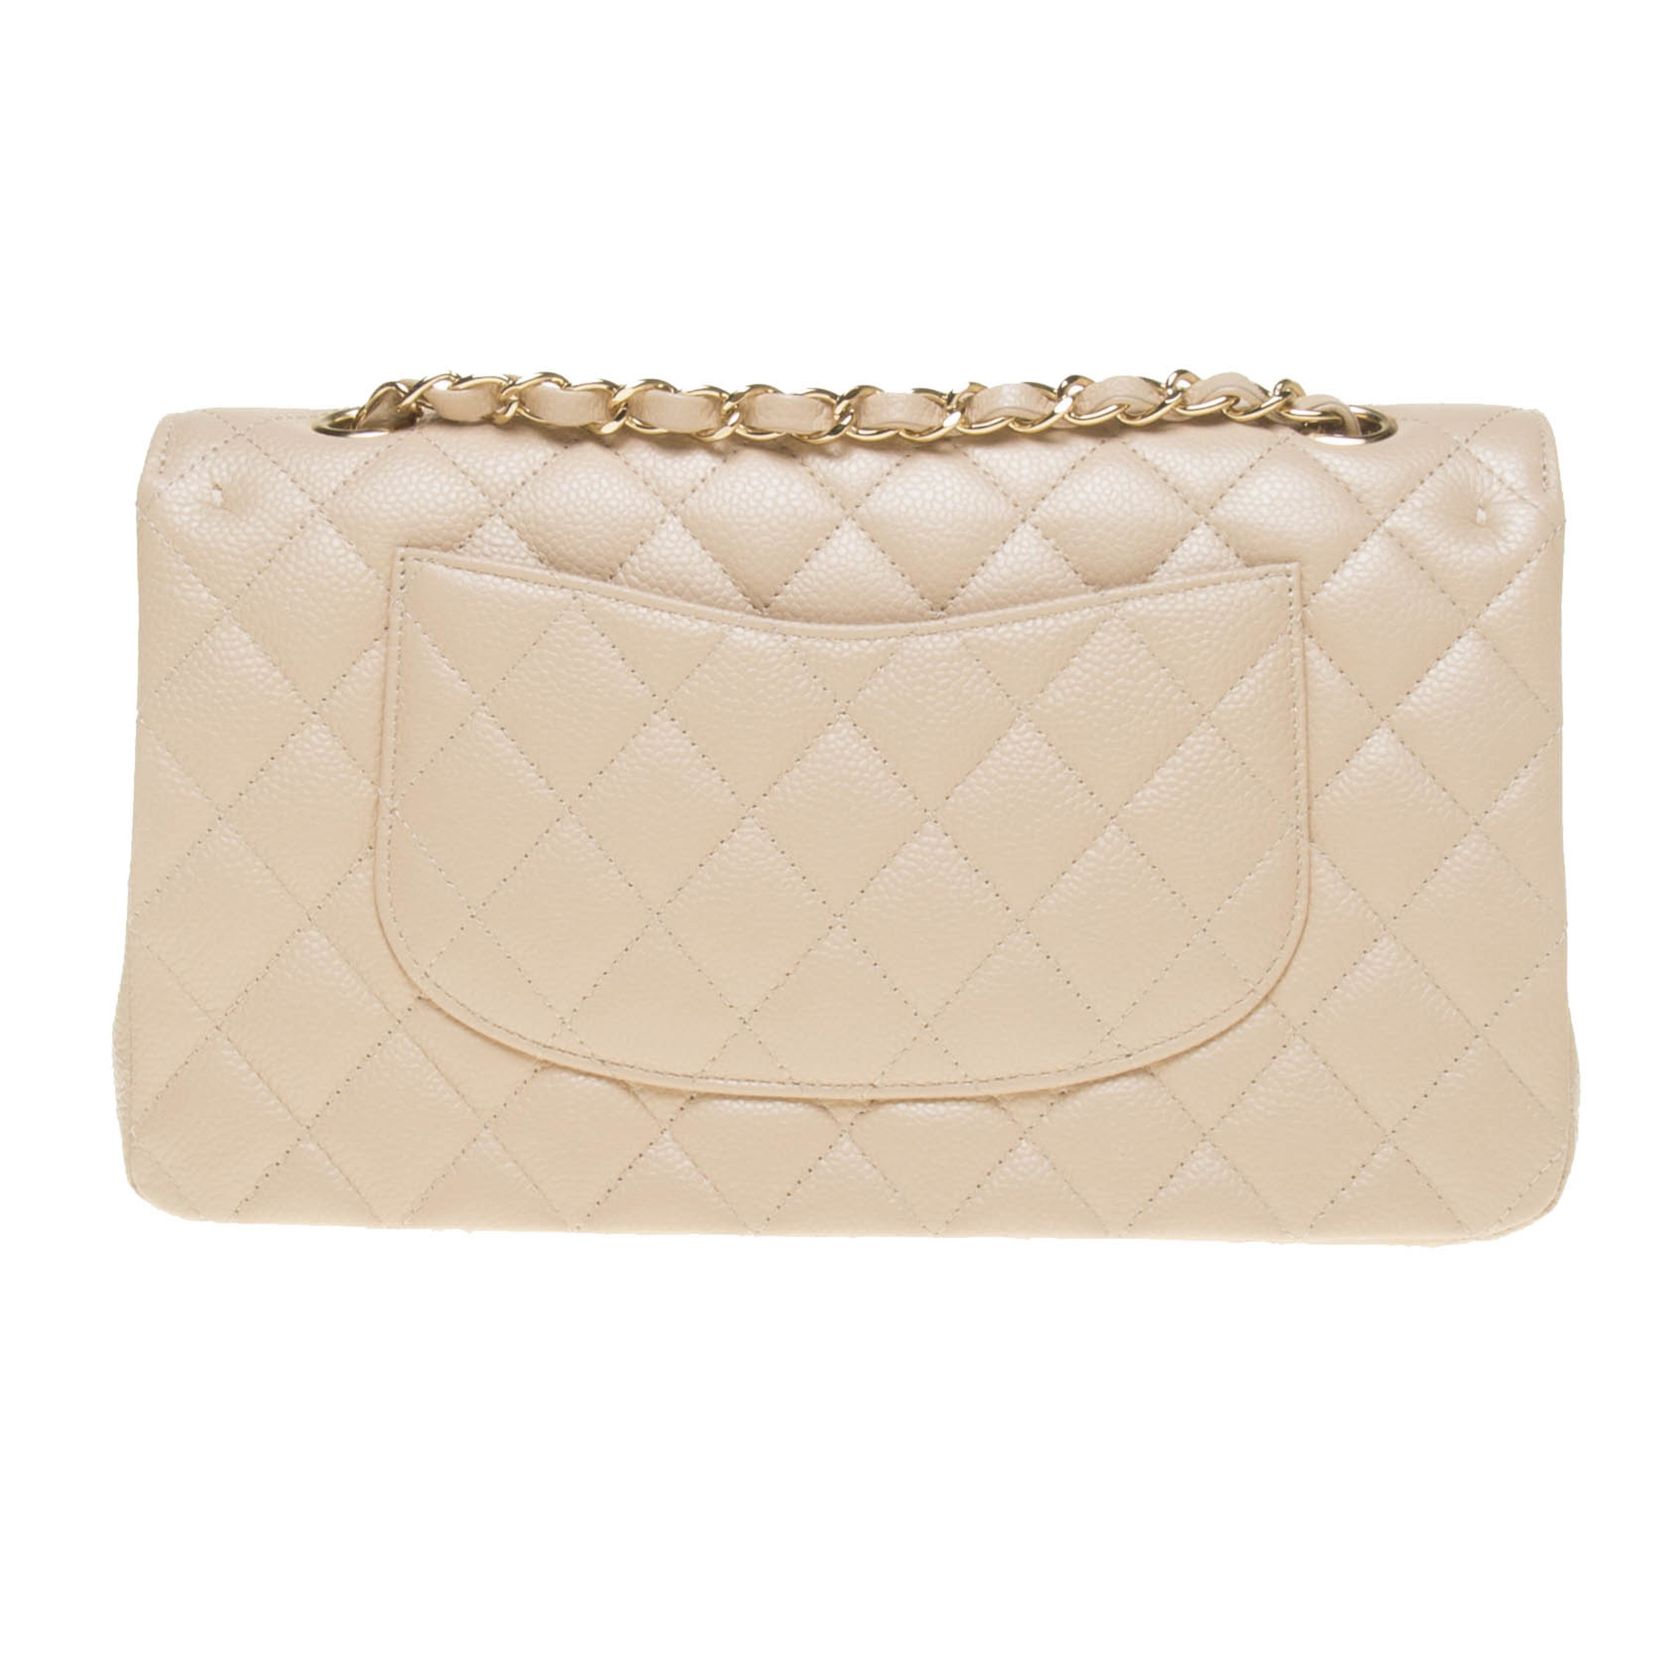 Chanel Beige Caviar Leather Quilted Classic Large Chain Bag for sale on ...